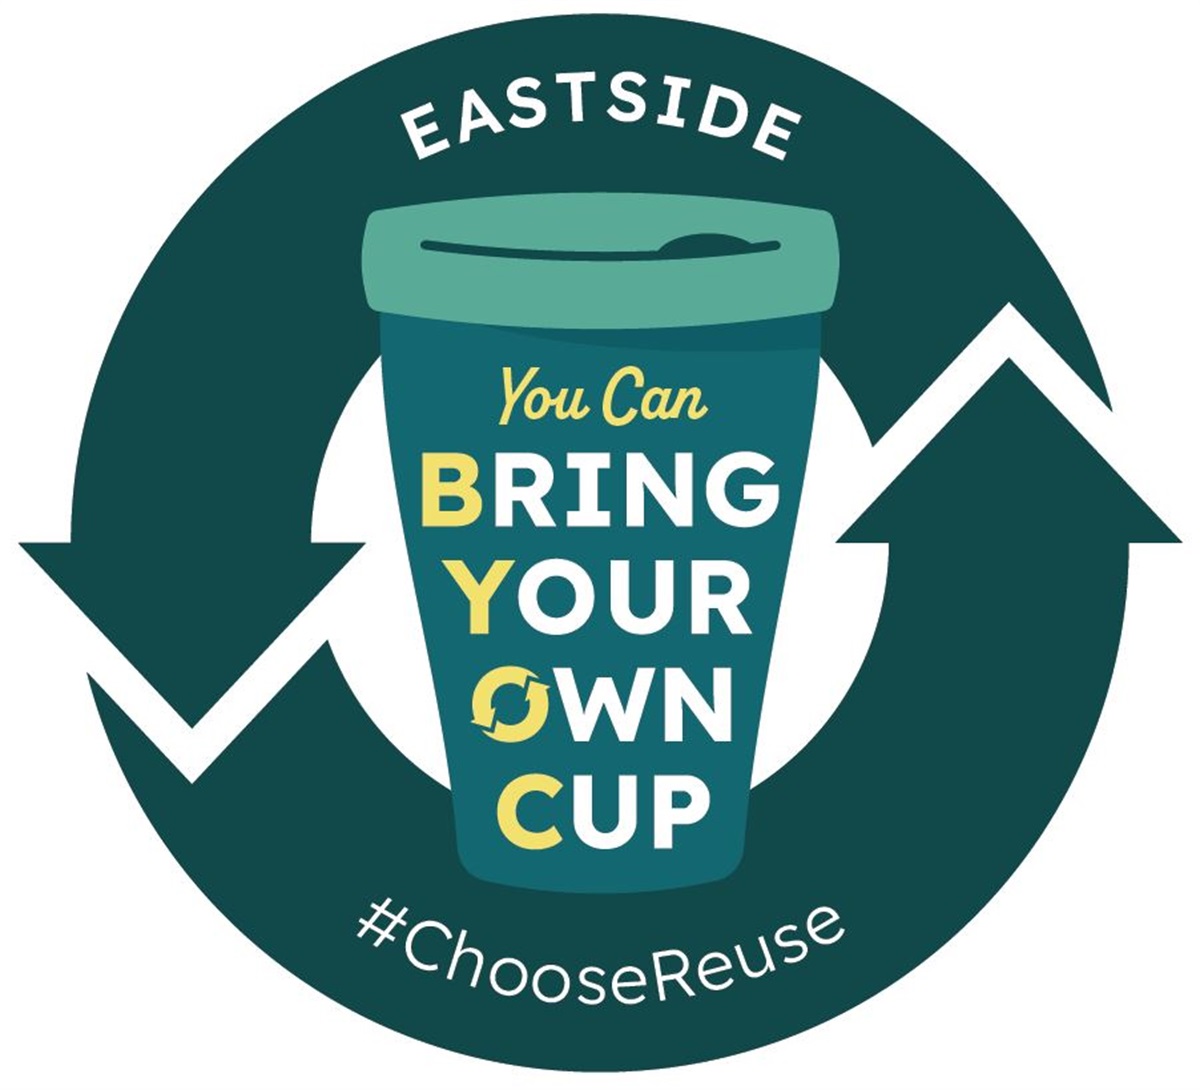 Eastside Bring Your Own Cup (BYOC) – City of Kirkland